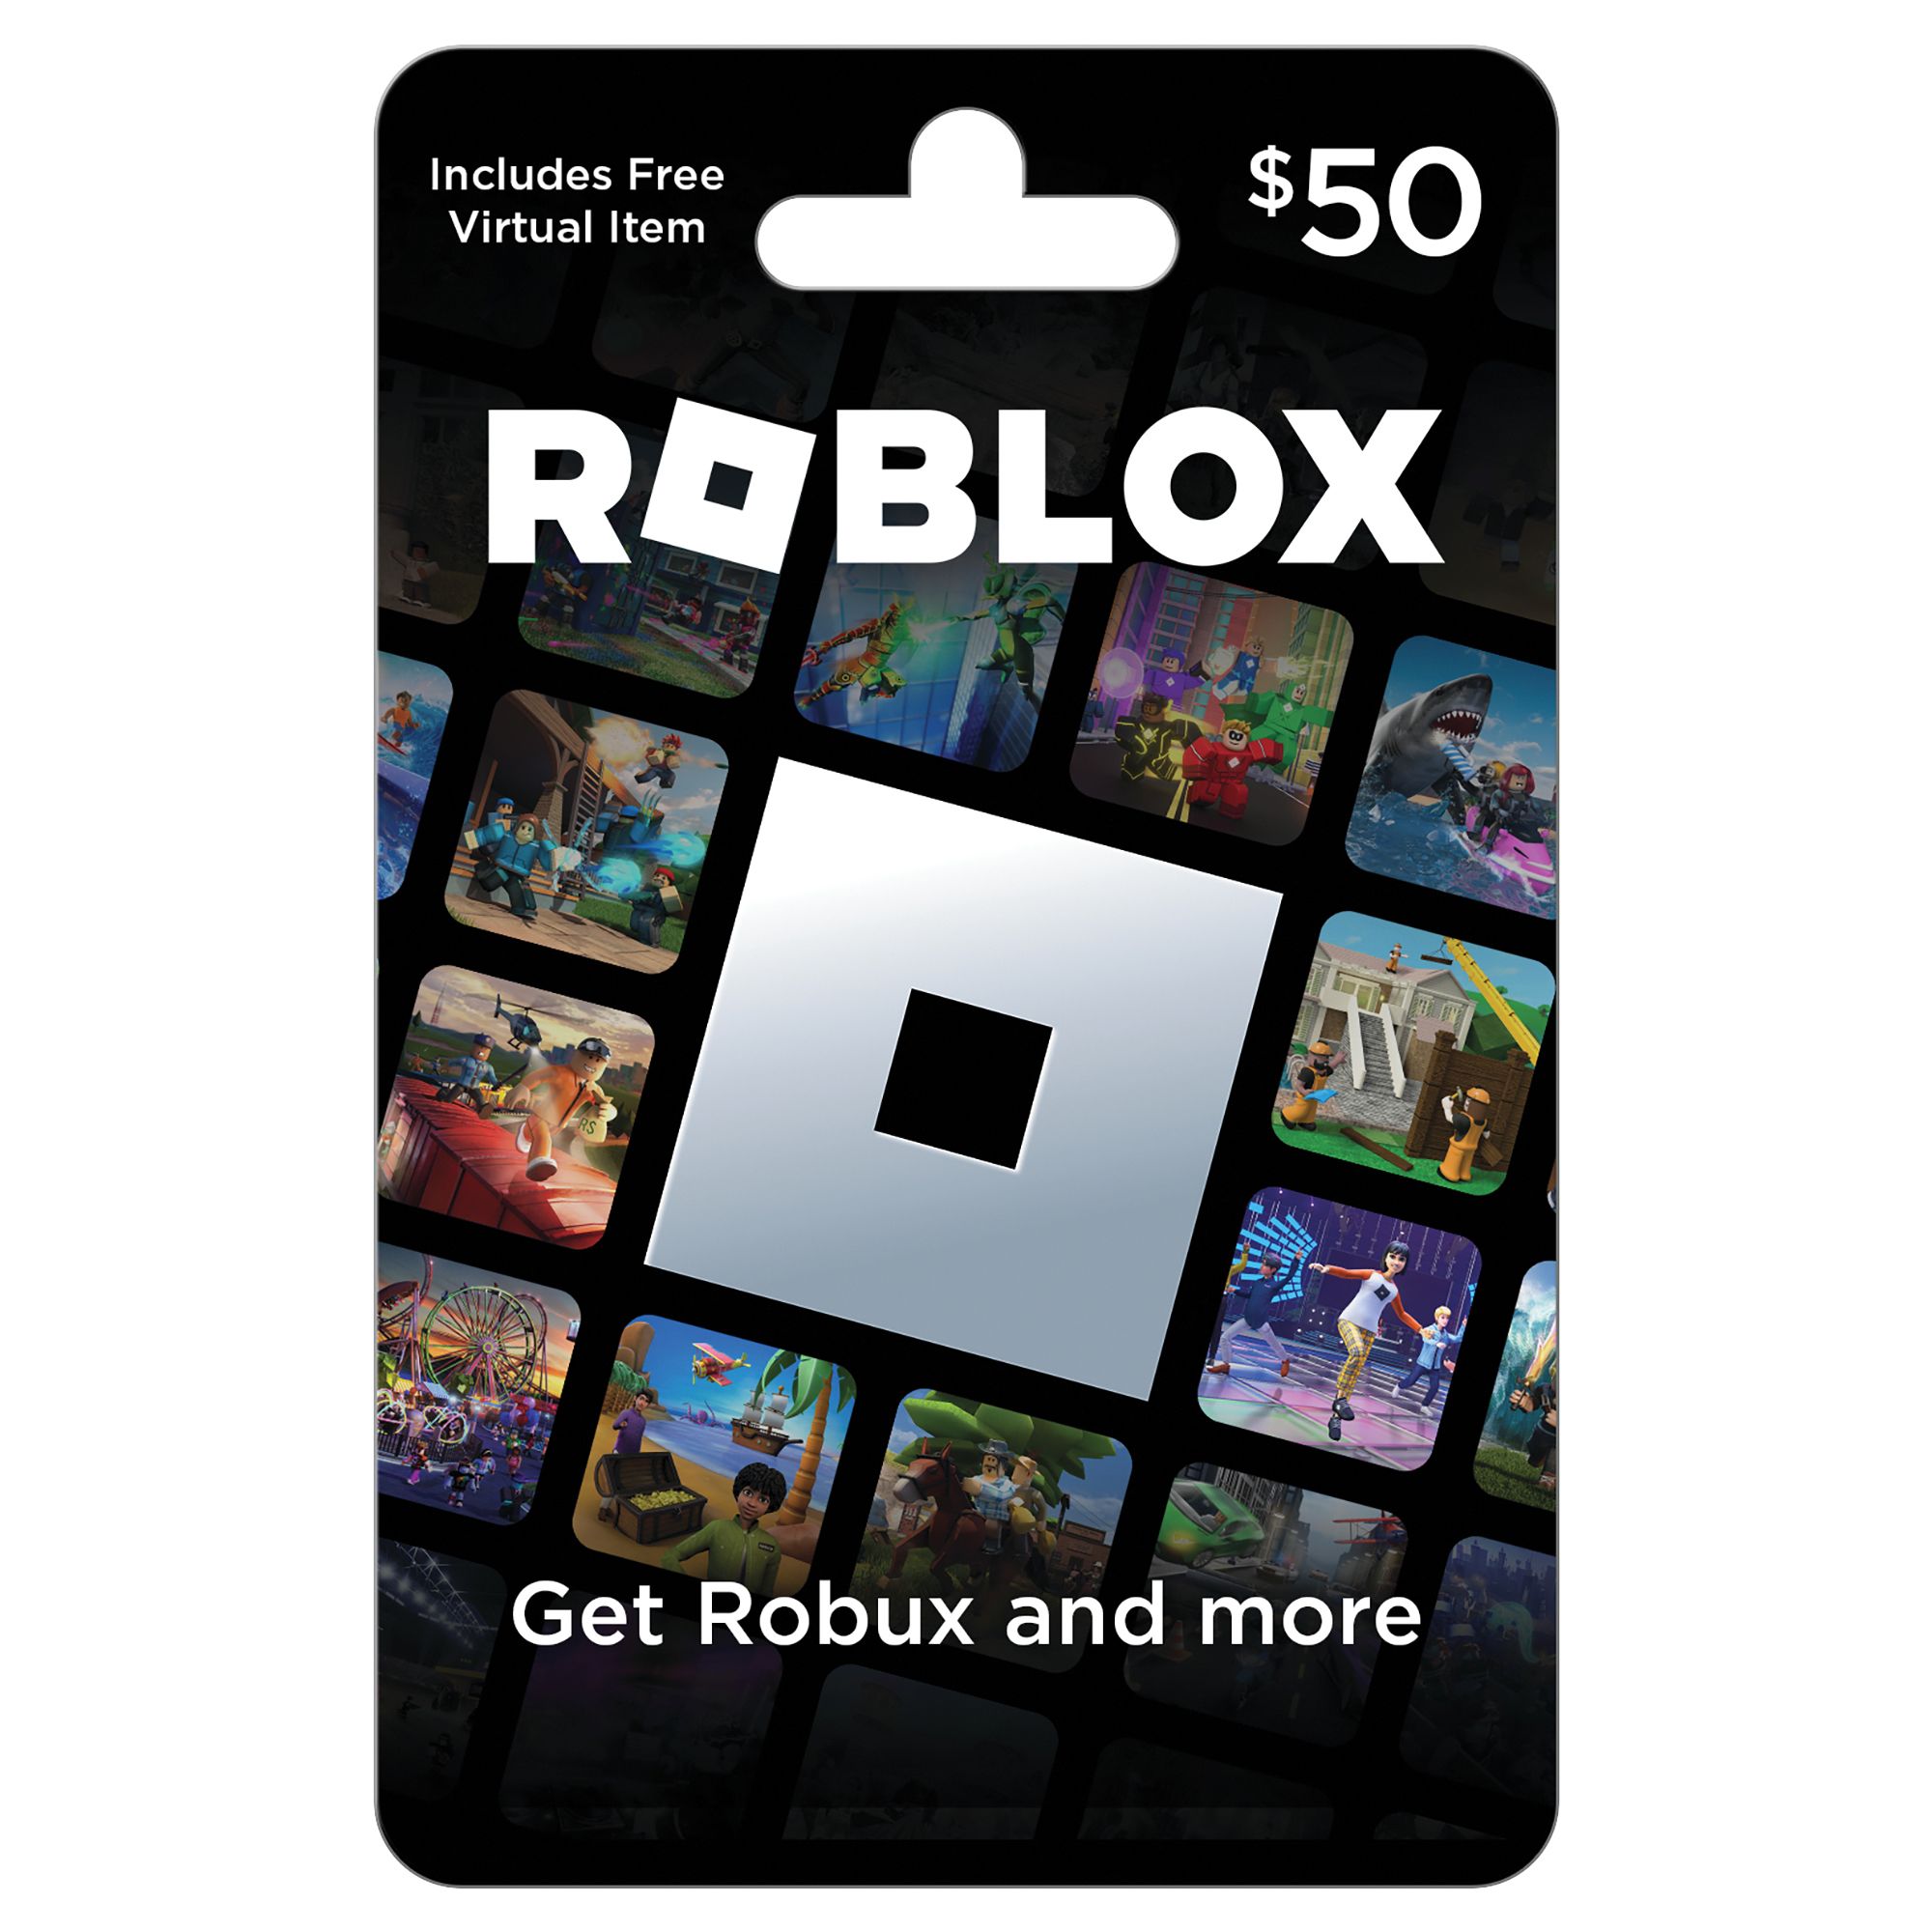 How to Redeem a Robux Gift Card (Roblox) 